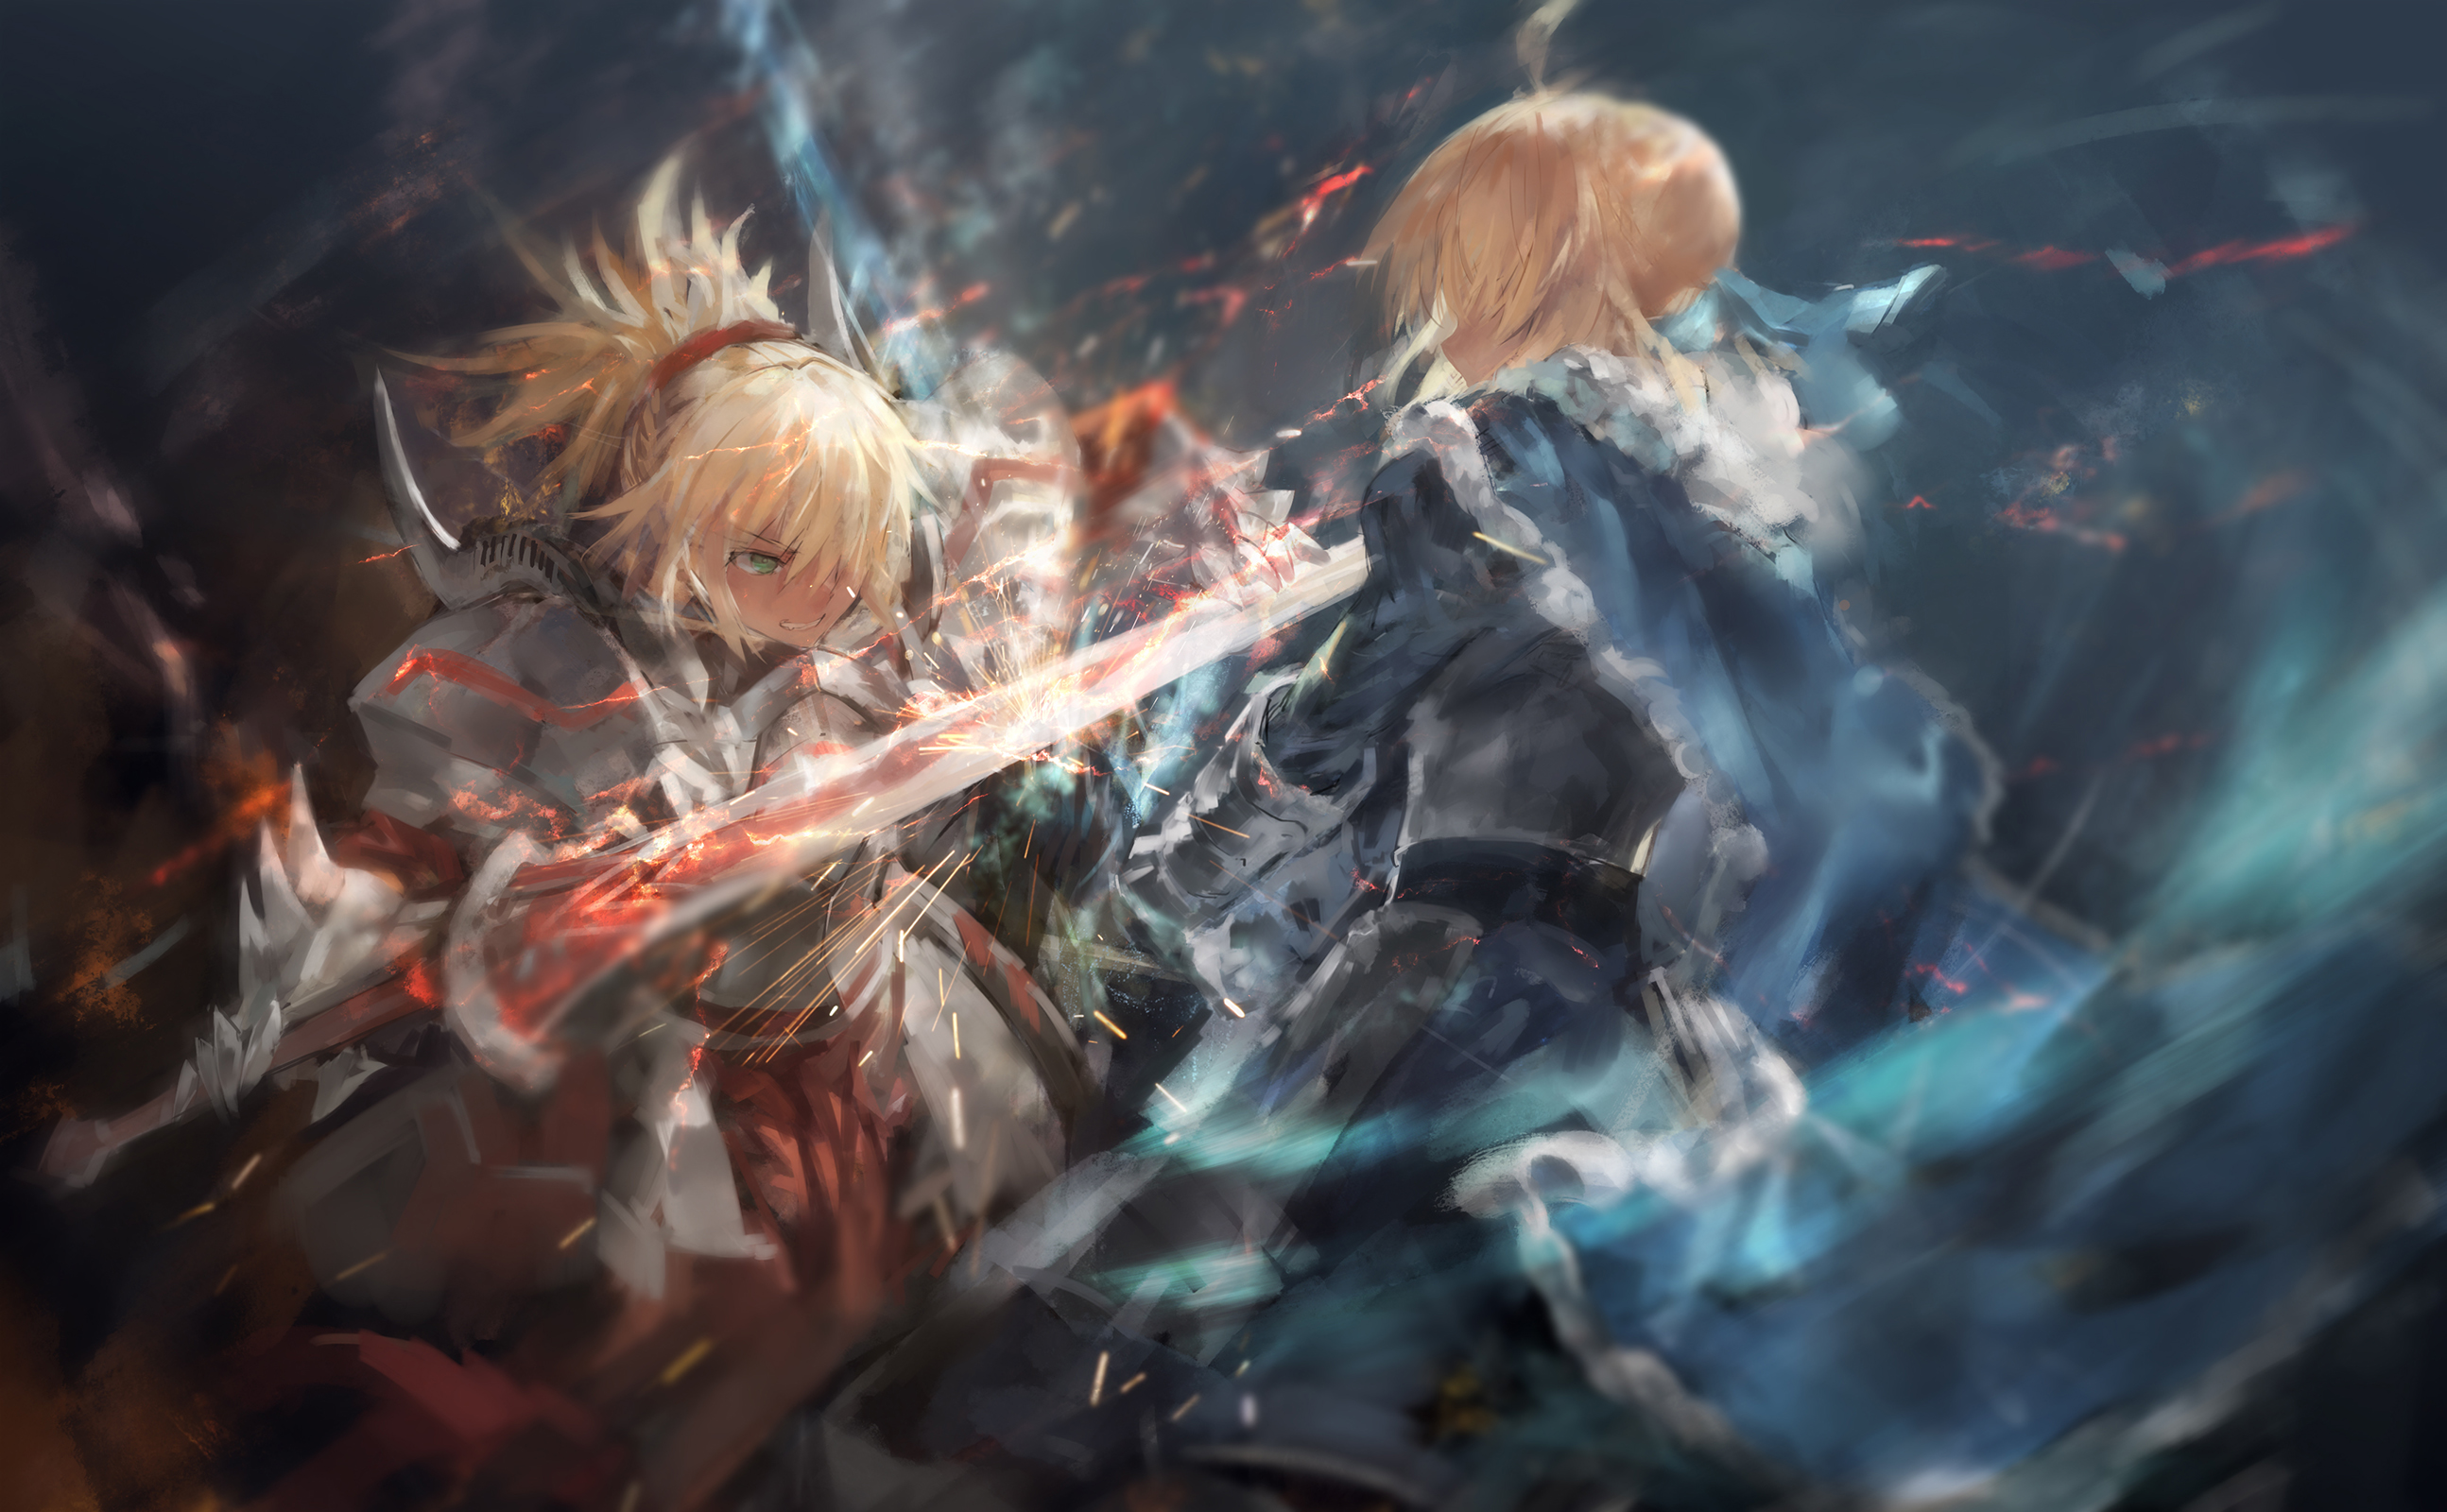 Saber Fate Apocrypha Hd Anime 4k Wallpapers Images Backgrounds Photos And Pictures